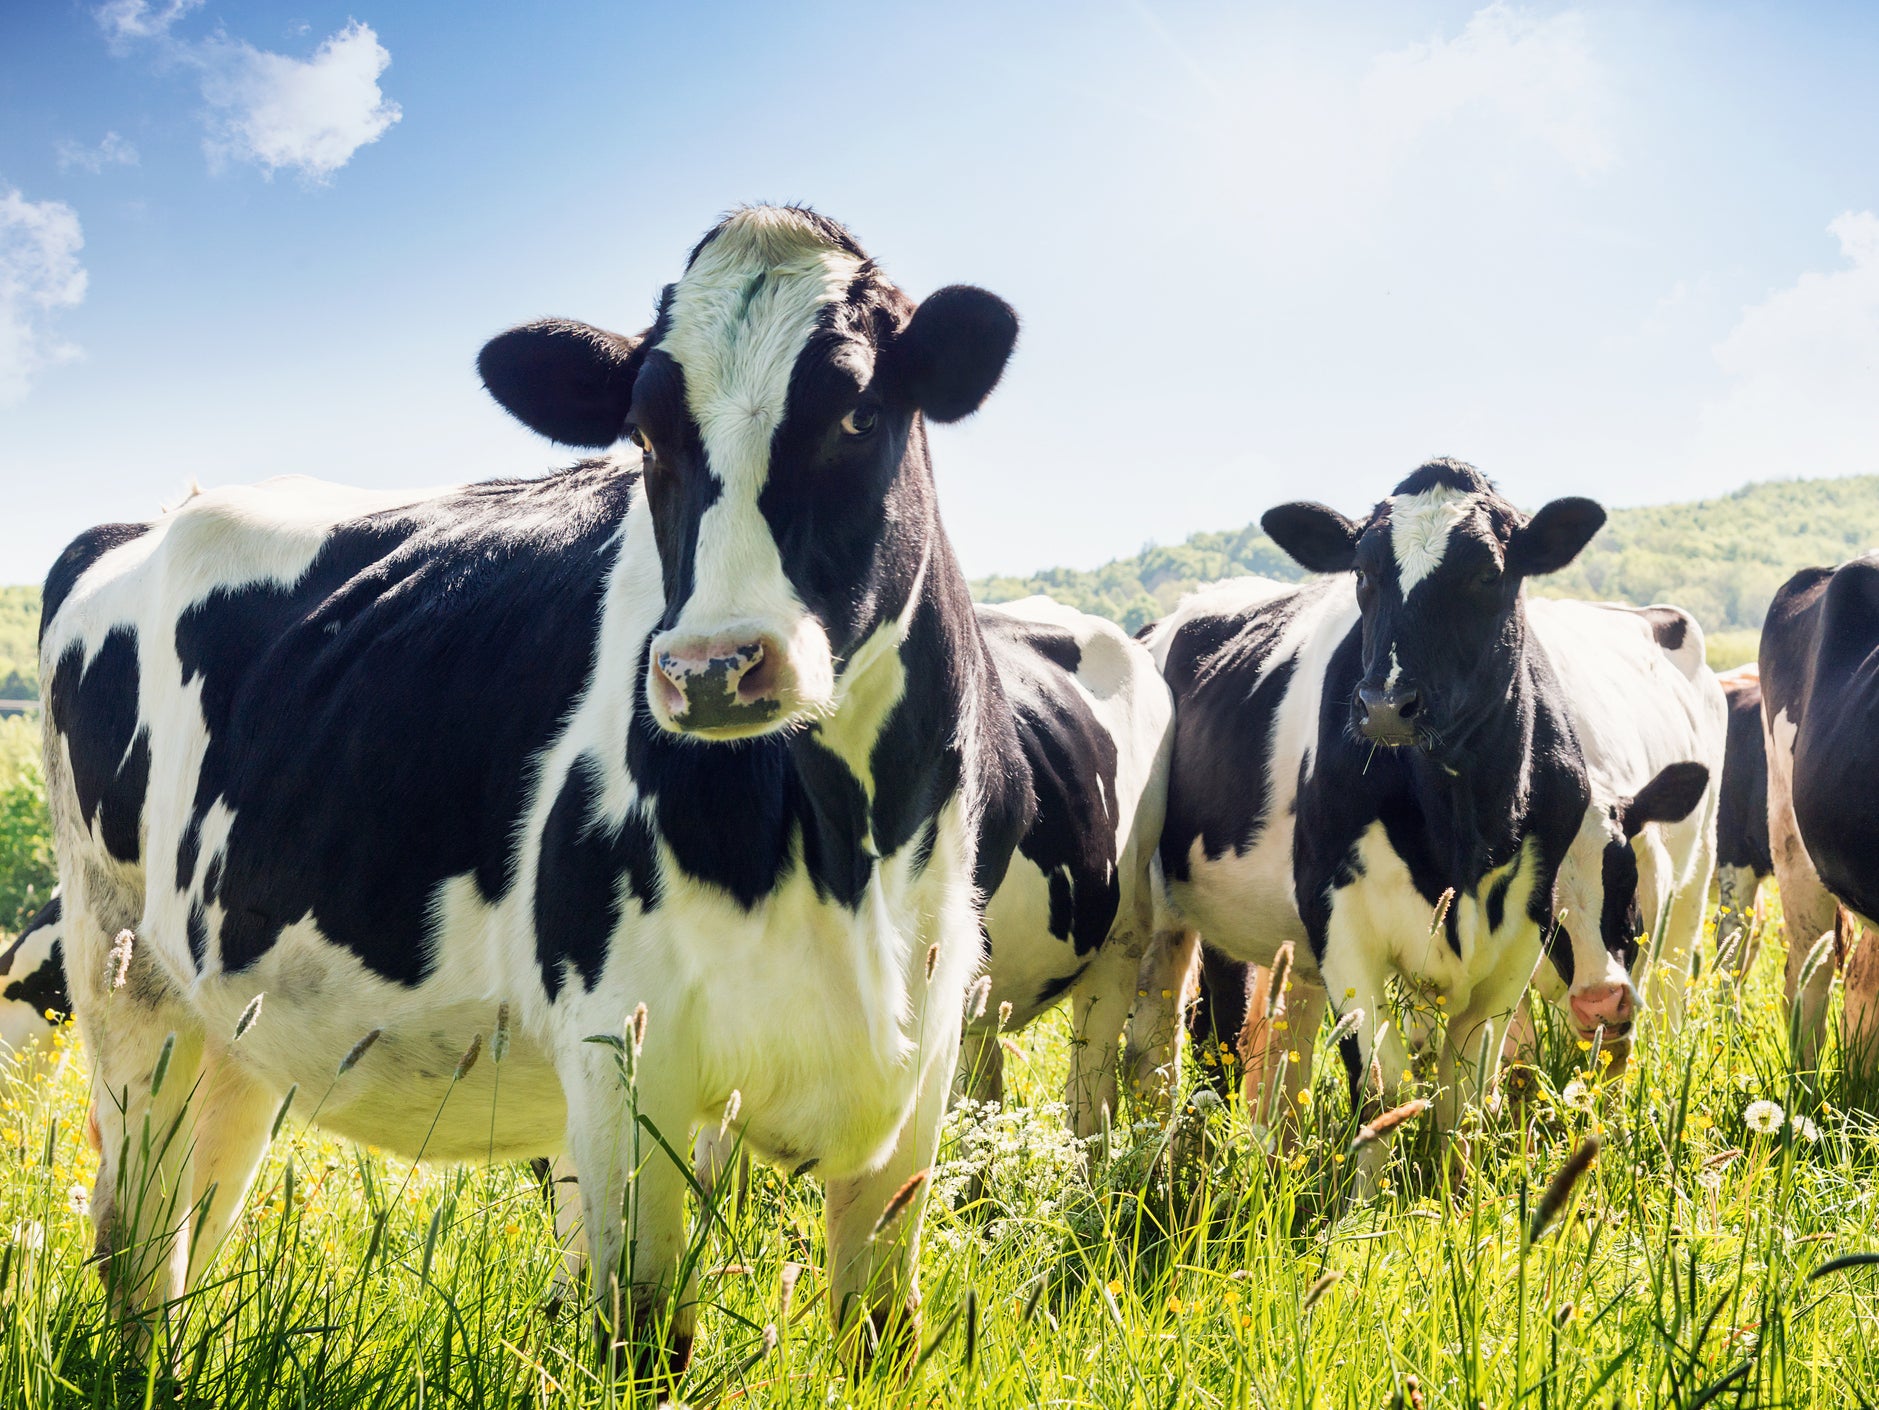 Dairy is the greatest contributor to emissions from livestock in the EU